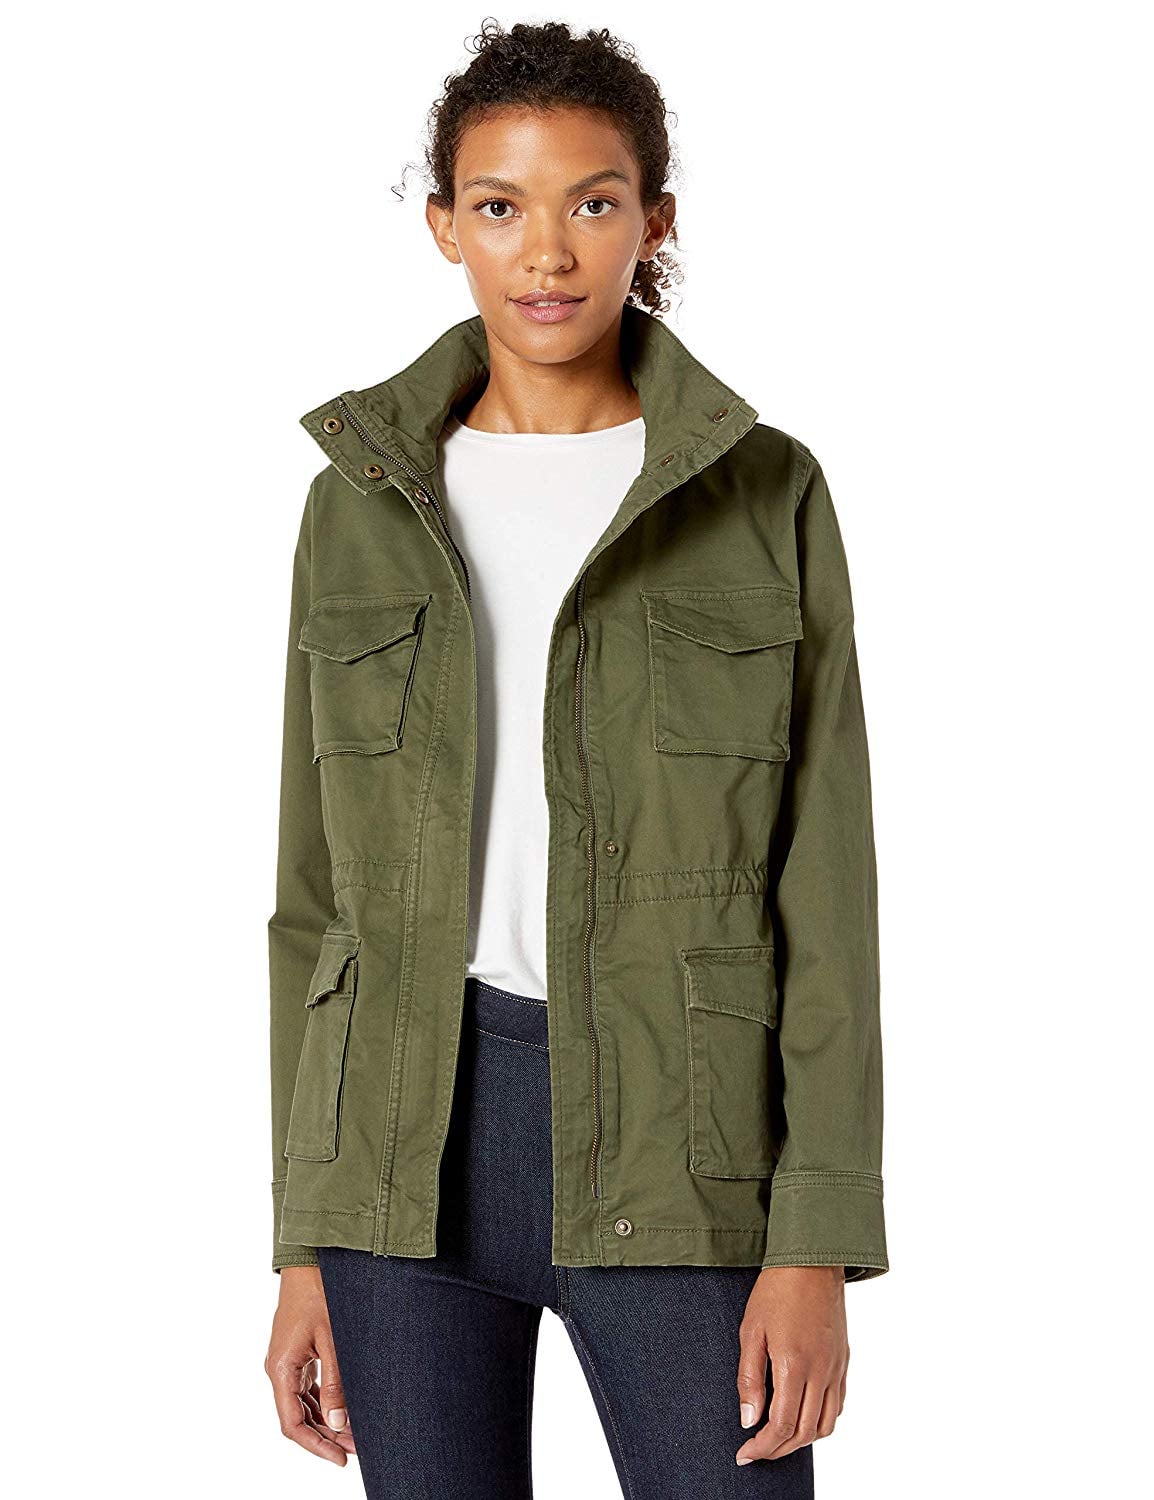 Essentials Utility Jacket, Yep, It's From ! 27 of the Best  Finds From 's Clothing Brands